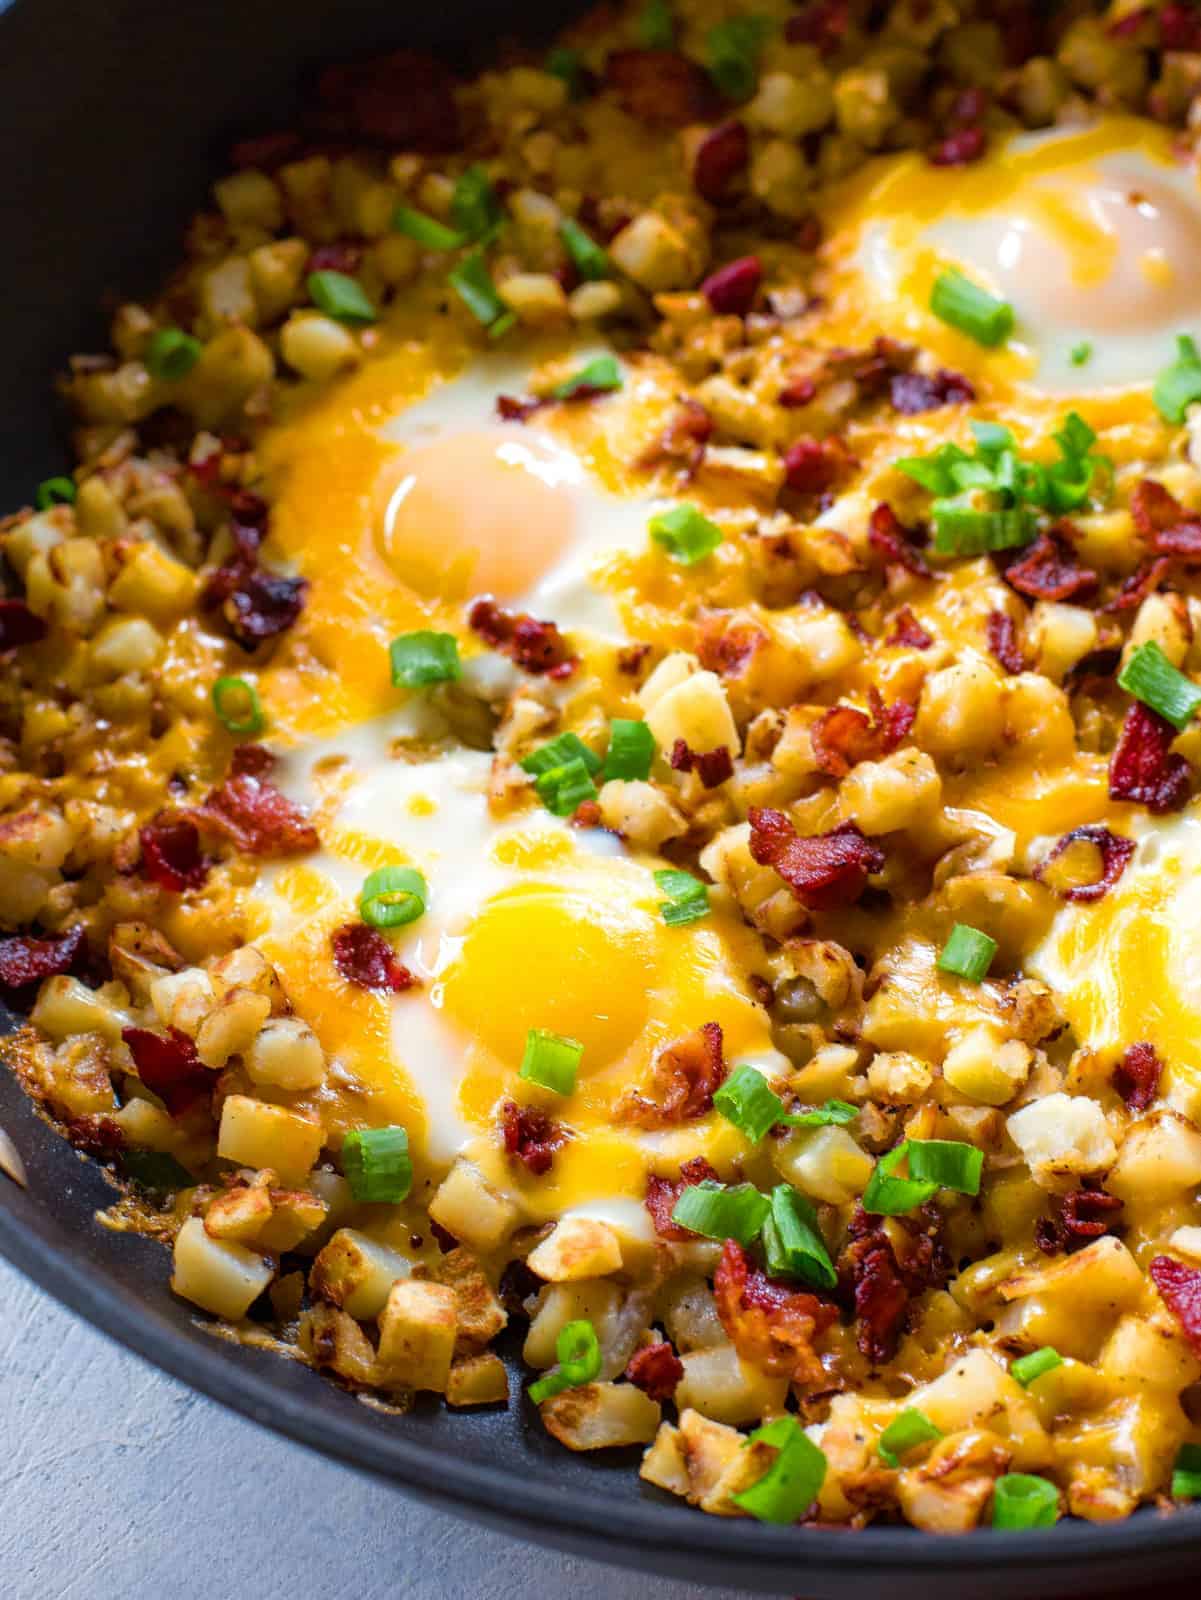 Bacon Egg And Potato Breakfast Skillet The Girl Who Ate Everything